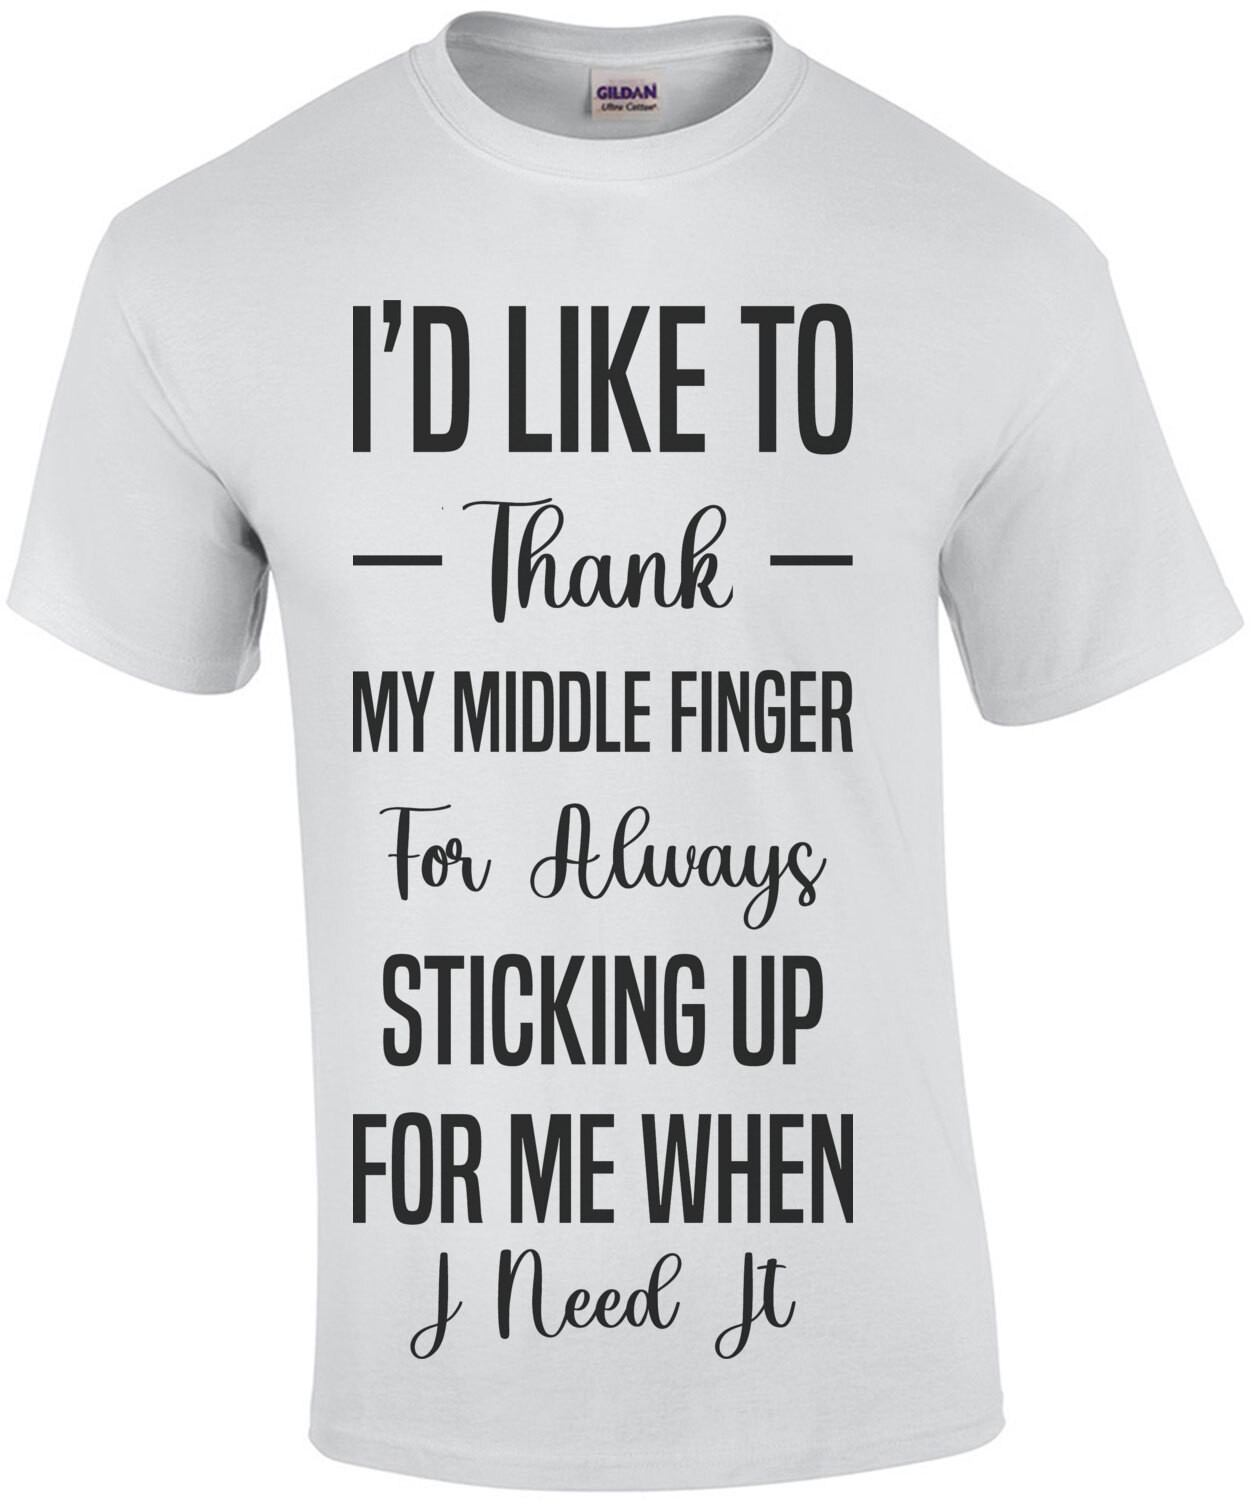 I'd like to thank my middle finger for always sticking up for me when I need it. Sarcastic T-Shirt